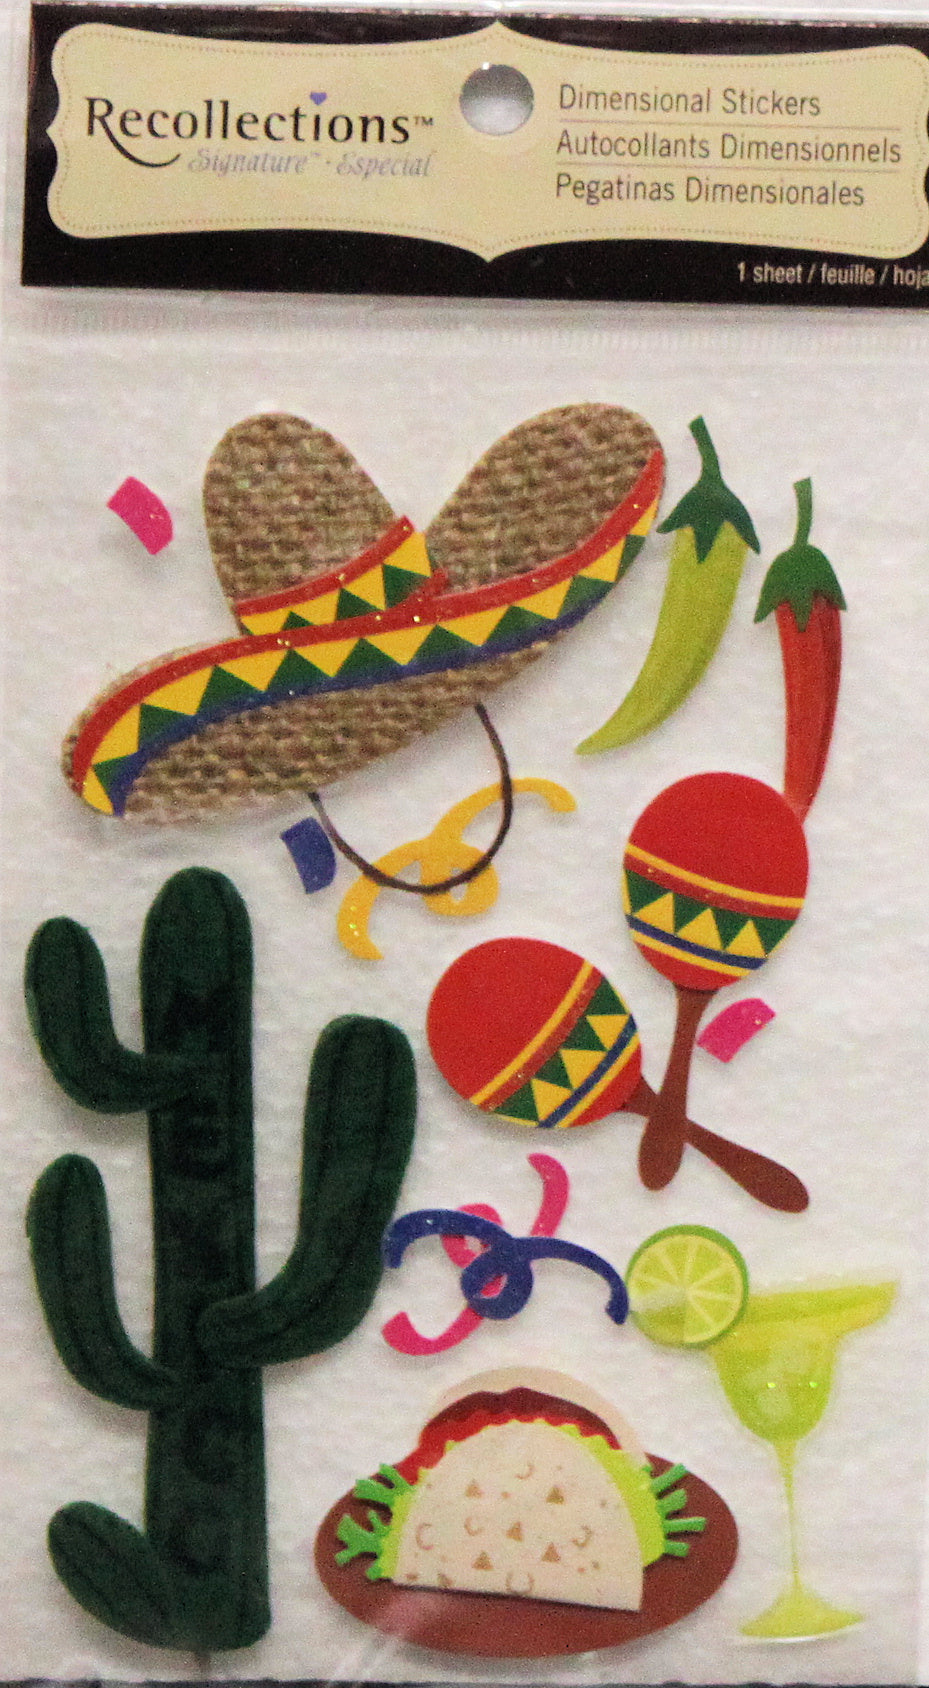 Recollections Mexico Dimensional Sticker